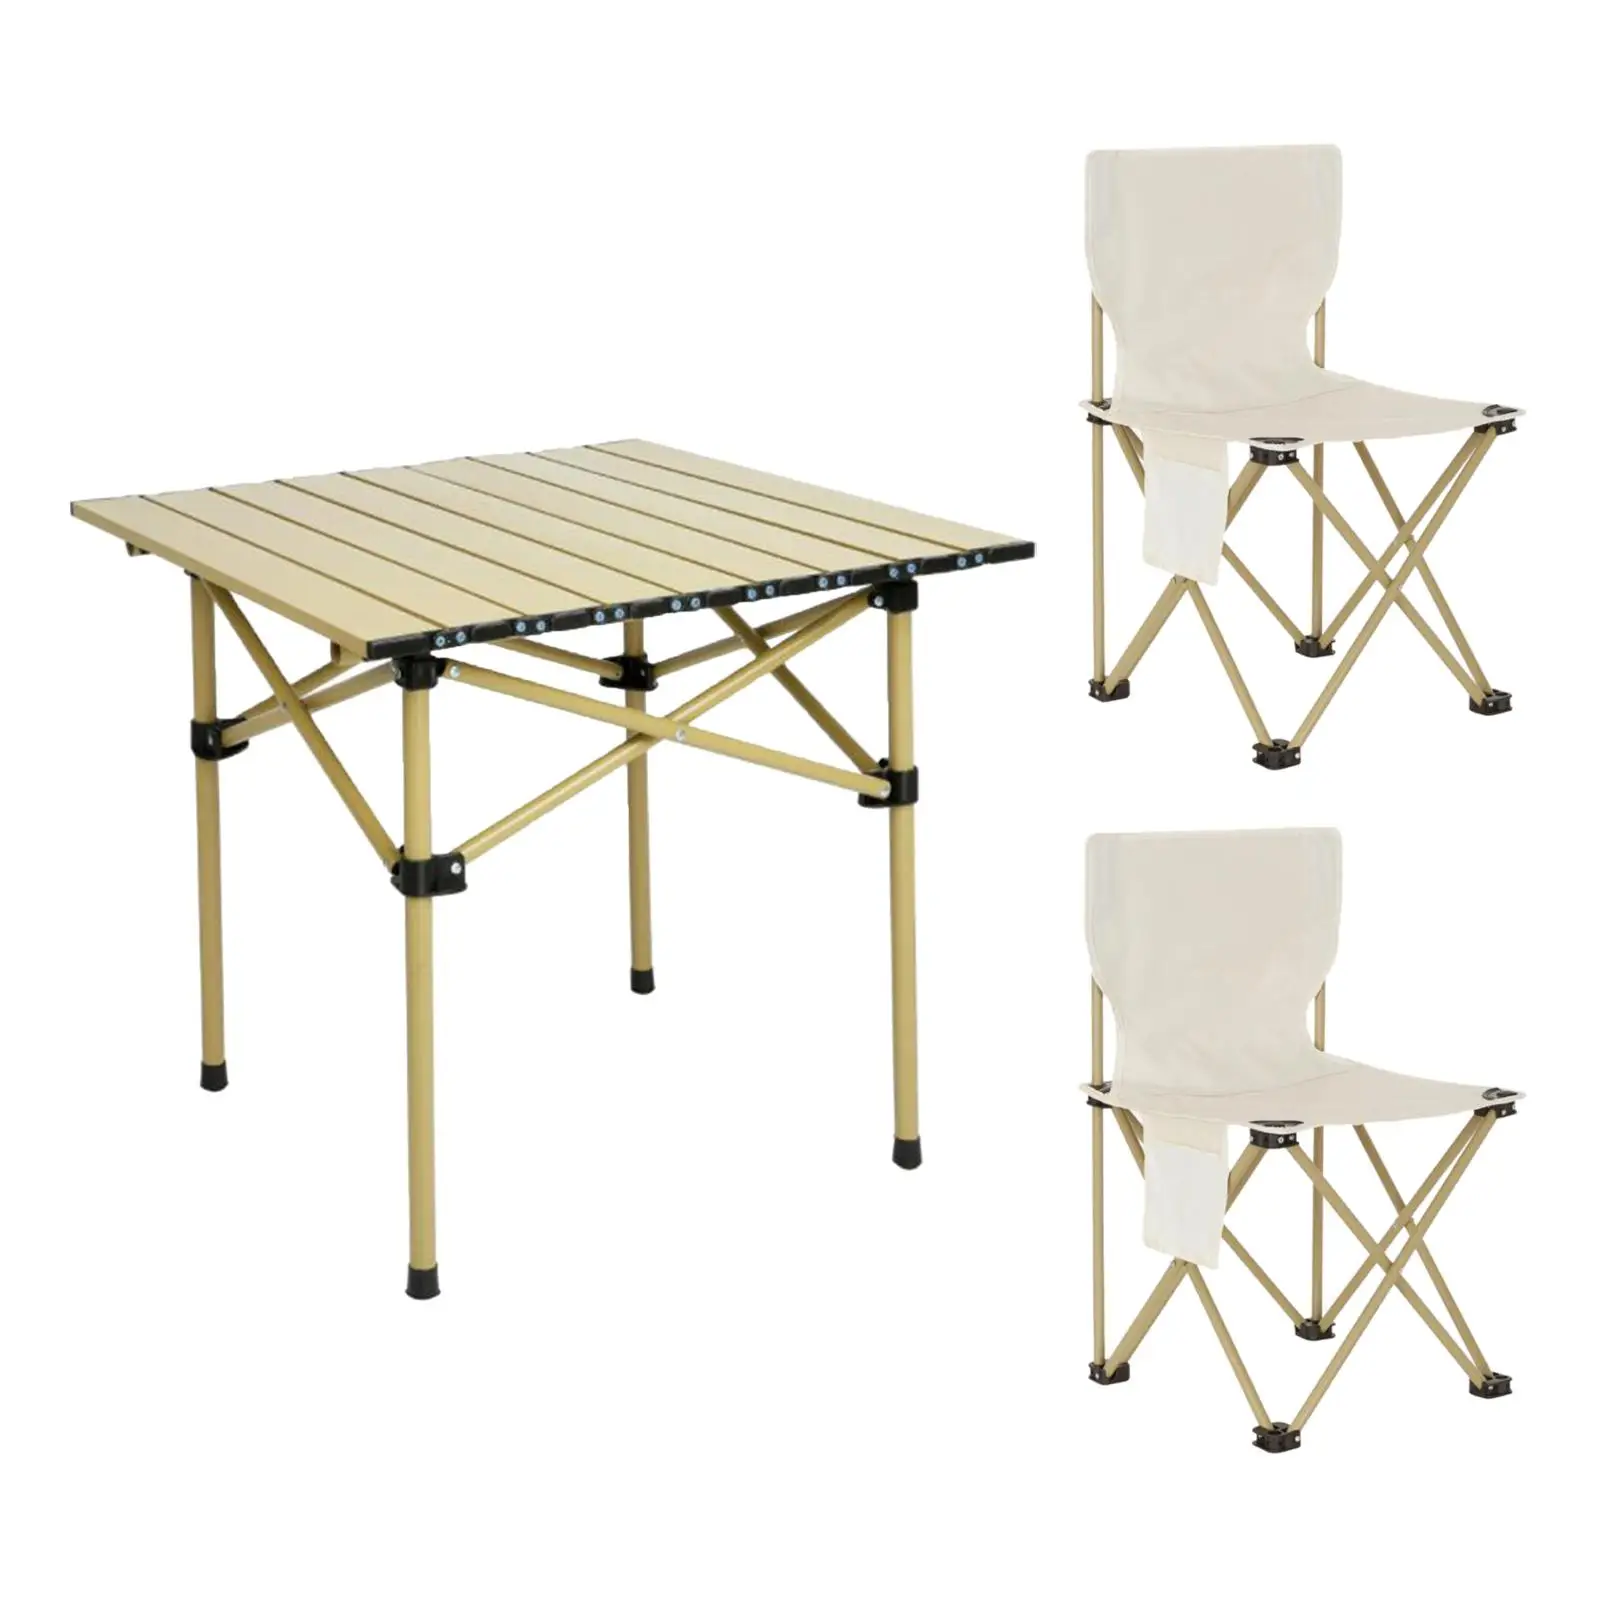 Camping Folding Table Chairs Set with 2 Stools Portable Side Table Foldable Picnic Table for Picnic Garden Yard Patio Outdoor